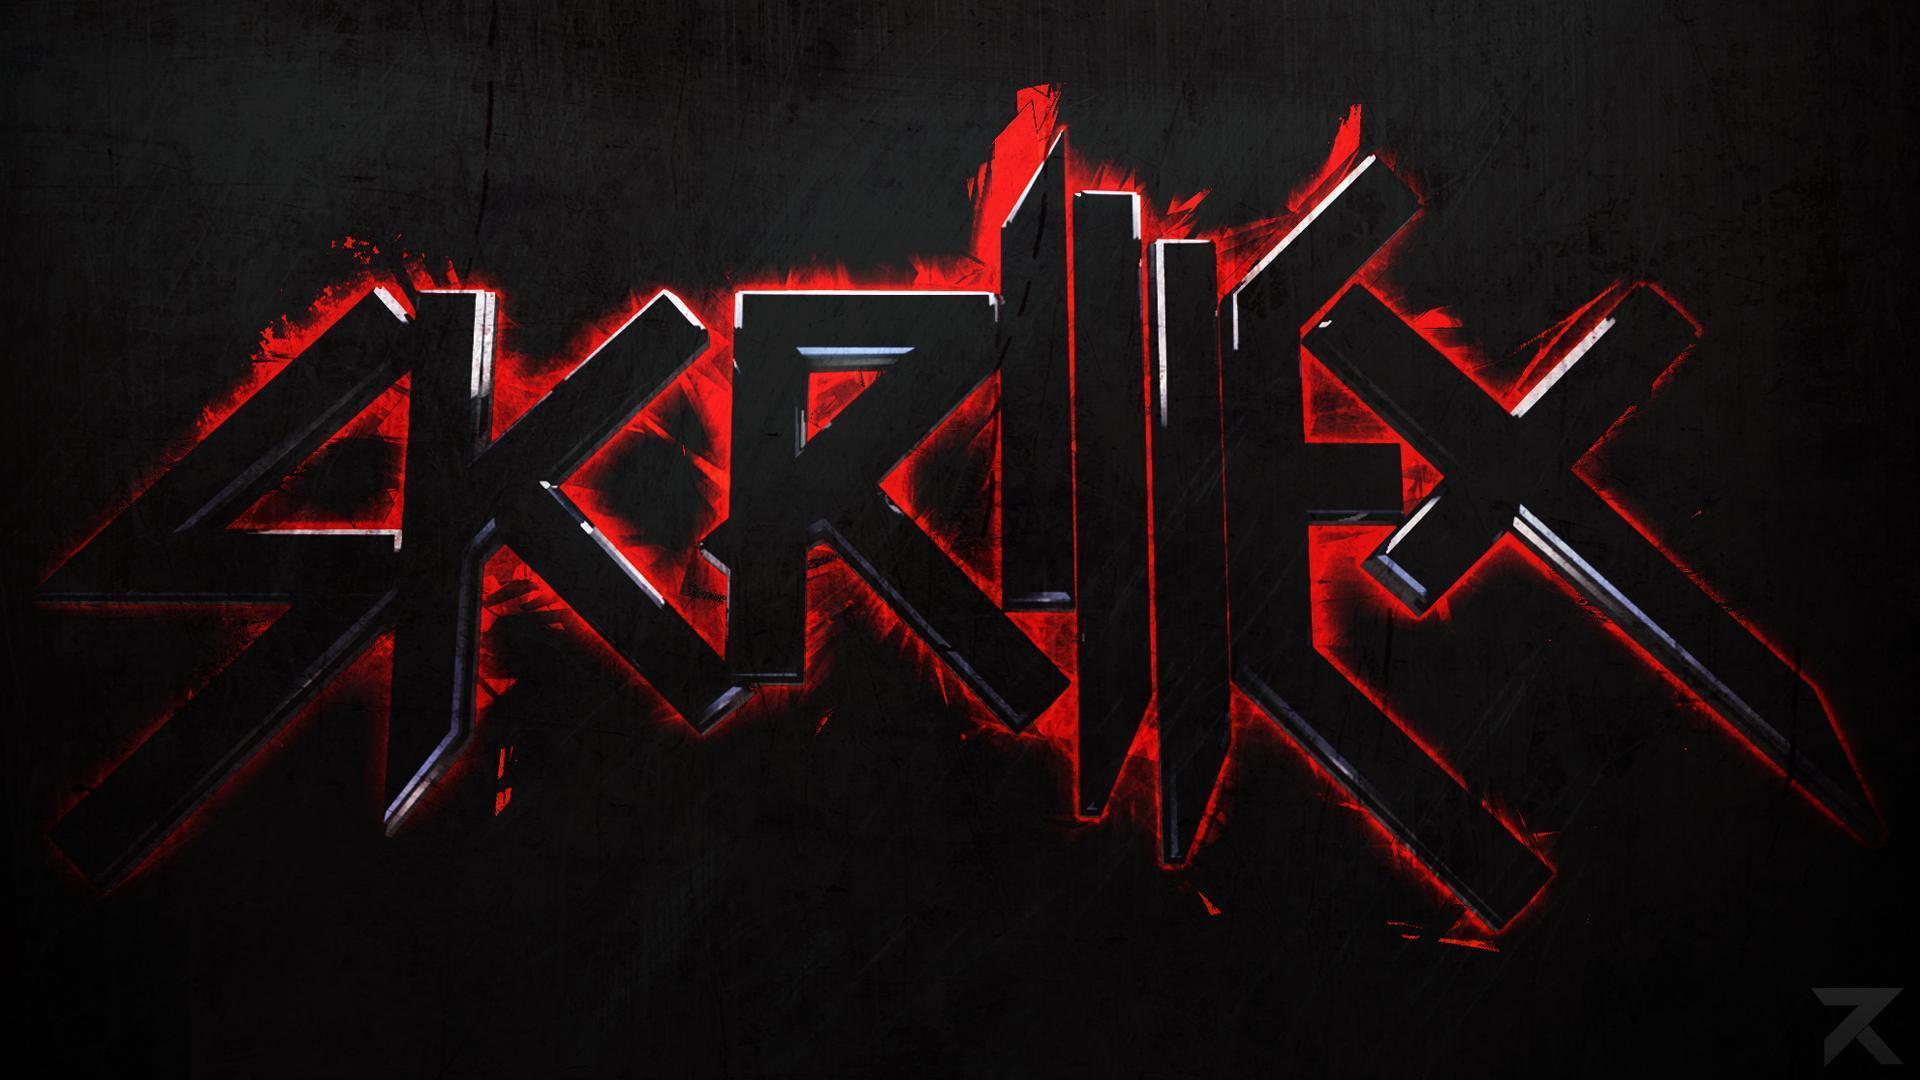 Grungy Skrillex Wallpapers by Clutchsky